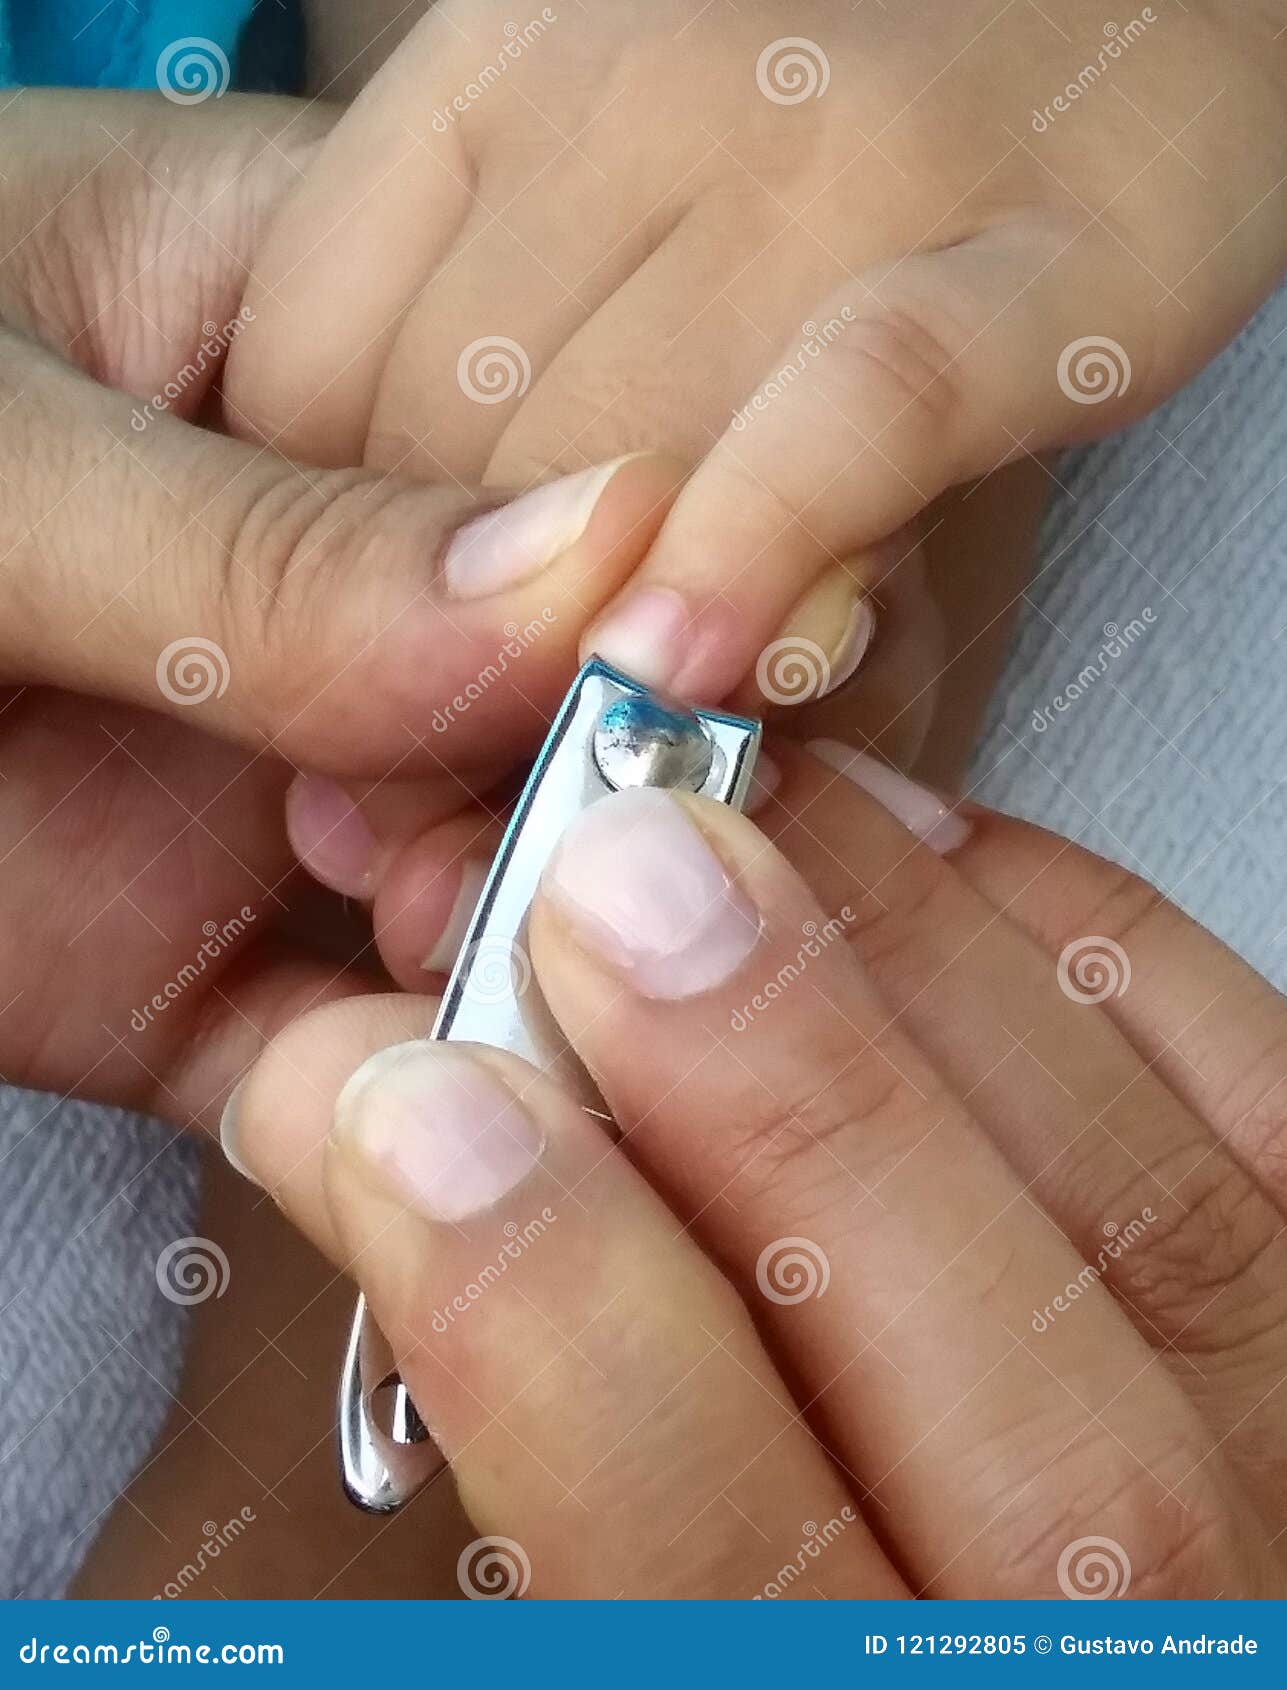 The Mother Cut Baby Fingers Nails Stock Image - Image of hygiene, care:  121292805